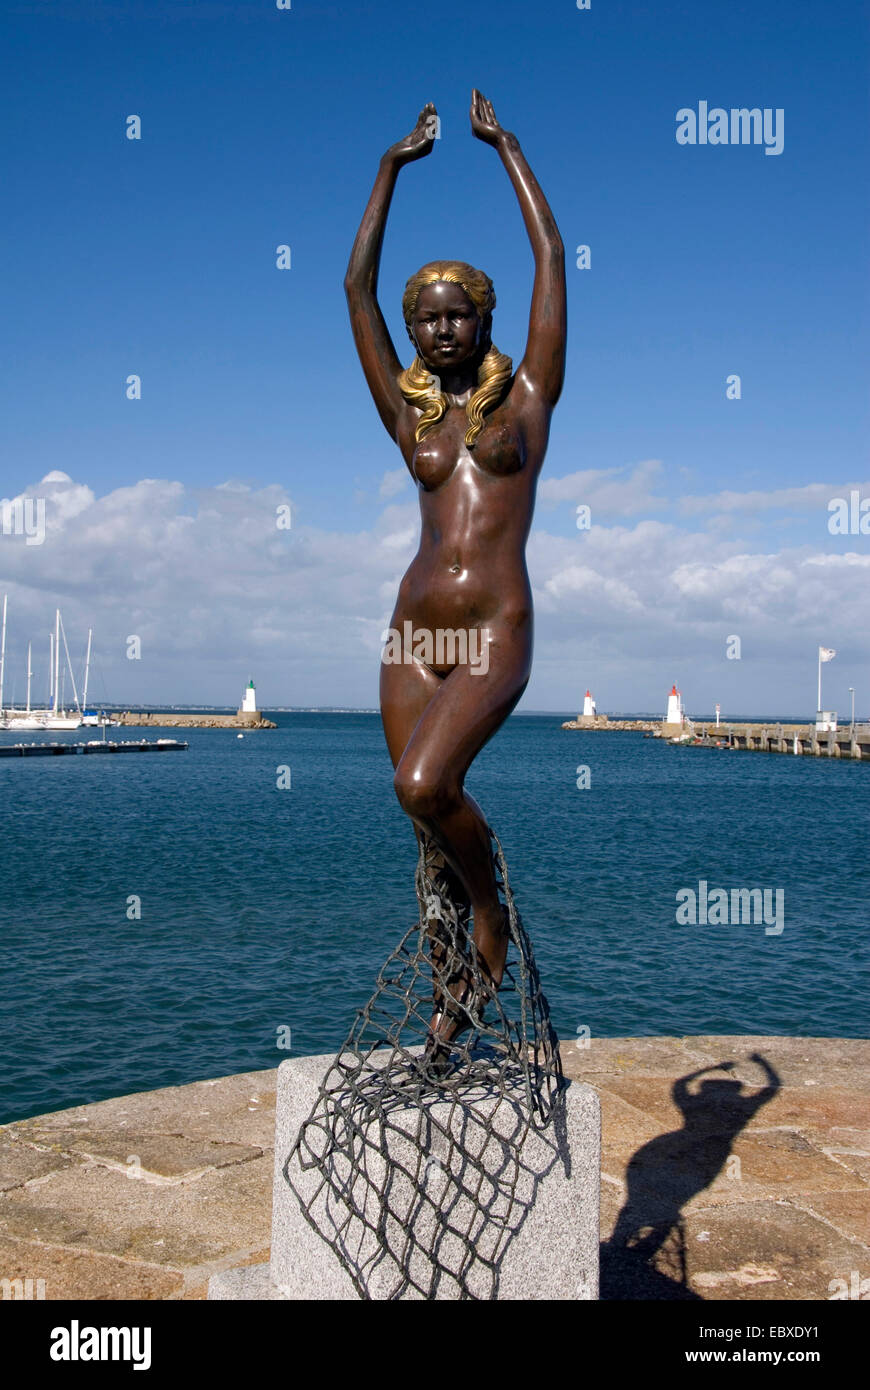 sculpture of a mermaid at the harbour of Port-Haliguen, France, Brittany, Port-Haliguen Stock Photo